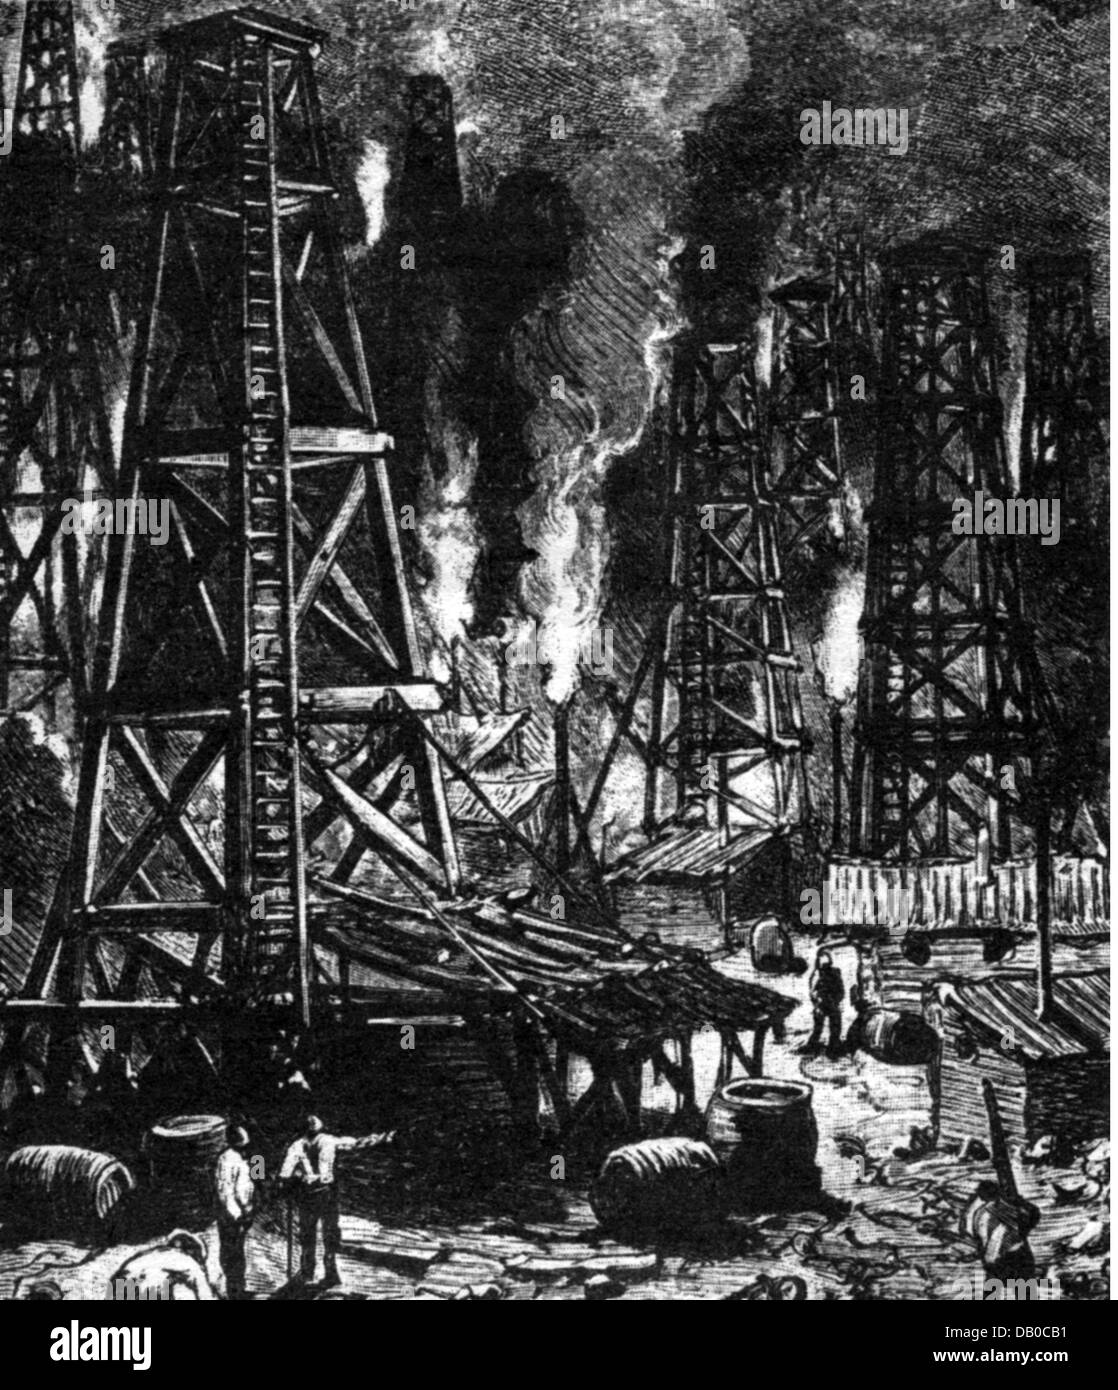 energy,crude oil,drilling derricks,Titusville,Pennsylvania,wood engraving,late 19th century,19th century,USA,United States of America,drilling derrick,wellhead,boring tower,boring trestle,drill tower,drill rig,drilling derricks,wellheads,boring towers,boring trestles,drill towers,drill rigs,oil extraction,oil production,crude oil,crude naphtha,raw oil,base oil,rock oil,crude petroleum,oil,resource,assign resources,raw material,raw materials,crude materials,oil boom,boom,industrialization,industrialisation,first commercial,Additional-Rights-Clearences-Not Available Stock Photo